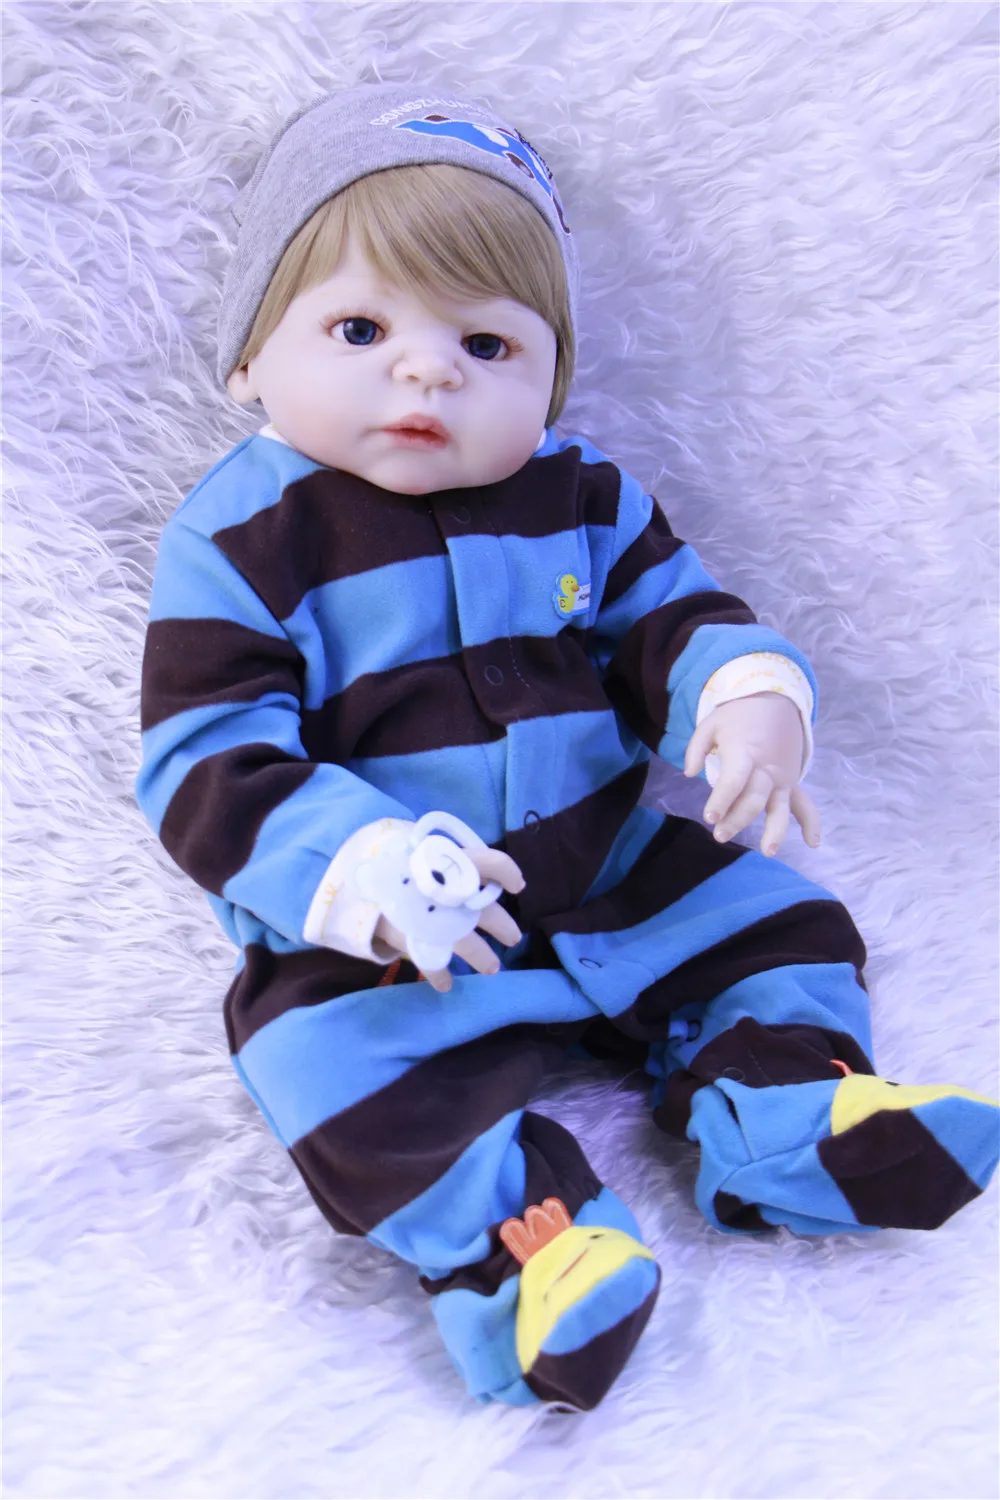 

bebe alive 55cm full silicone Reborn baby dolls lol toddler boy 22inch Collectible bathe playmate lovely boncecas brinquedos